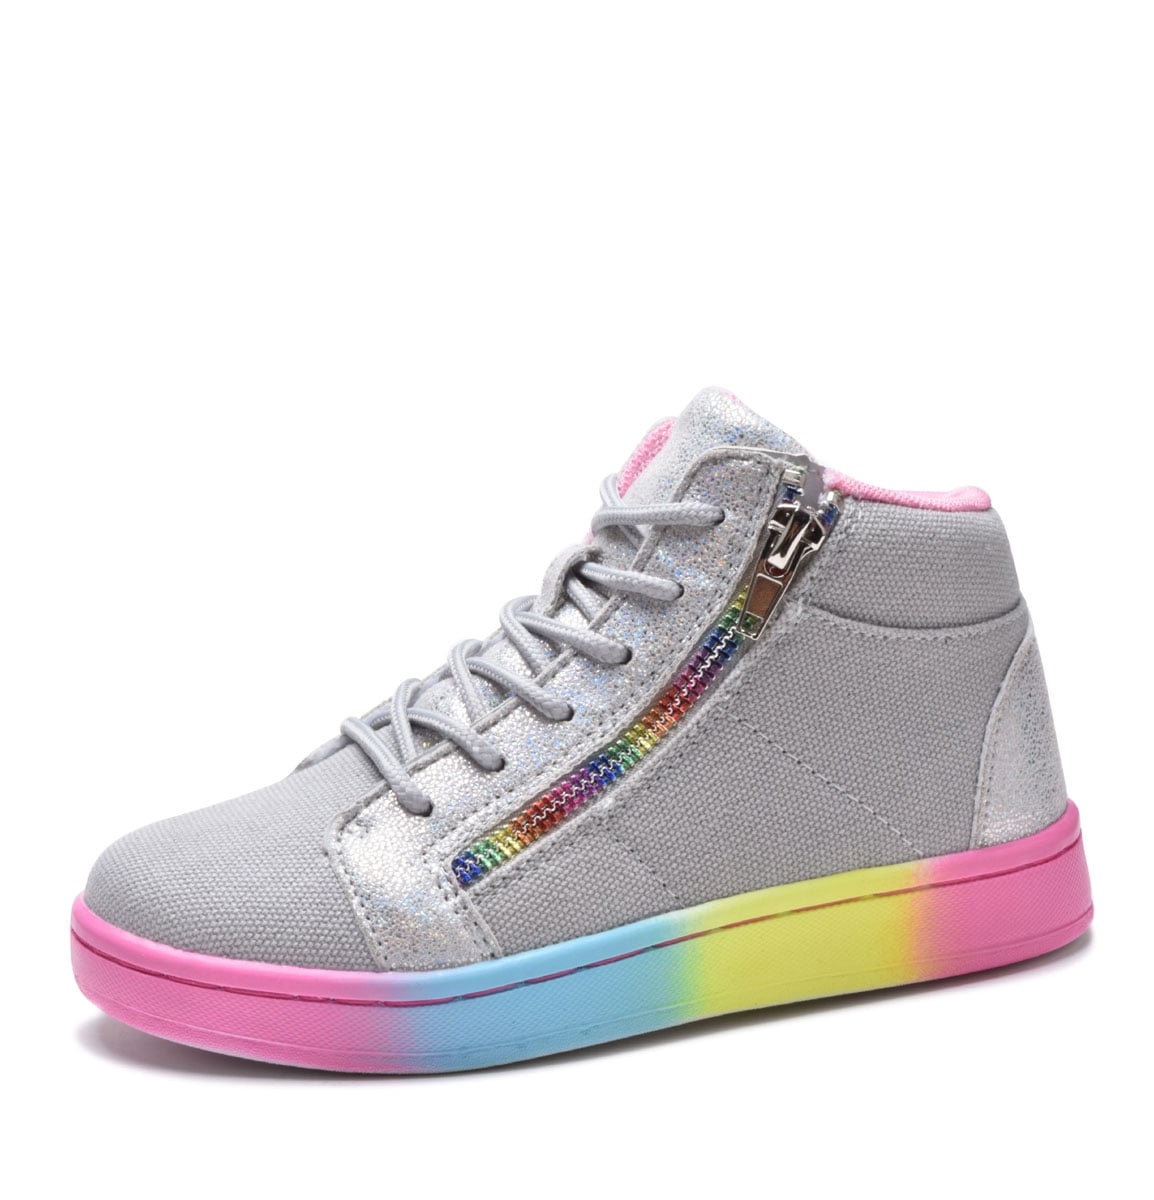 cutest birthday shoes. birthday shoes personalized birthday shoes Sour kid birthday shoes birthday sneakers Schoenen Meisjesschoenen Sneakers & Sportschoenen 